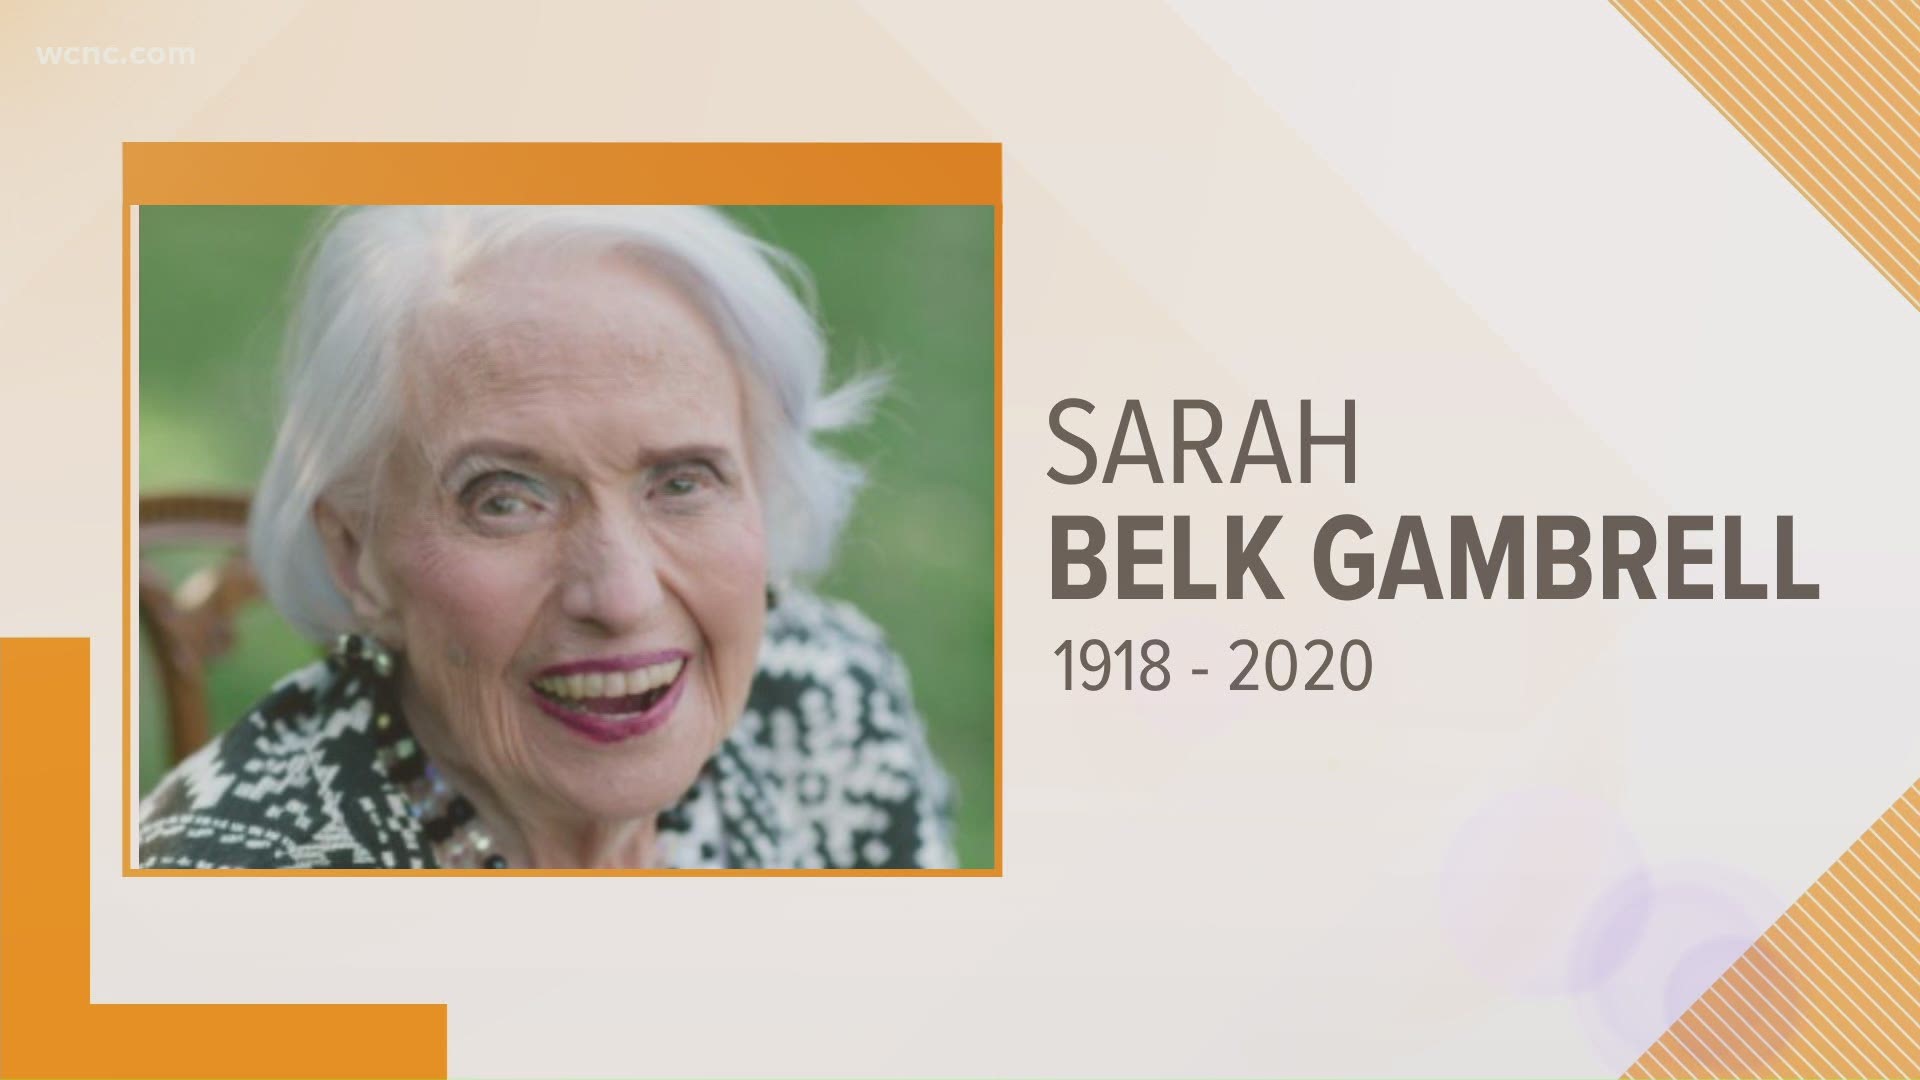 Charlotte philanthropist Sarah Belk Gambrell, the daughter of W.H. Belk Sr., the founder of Belk stores, died at the age of 102.